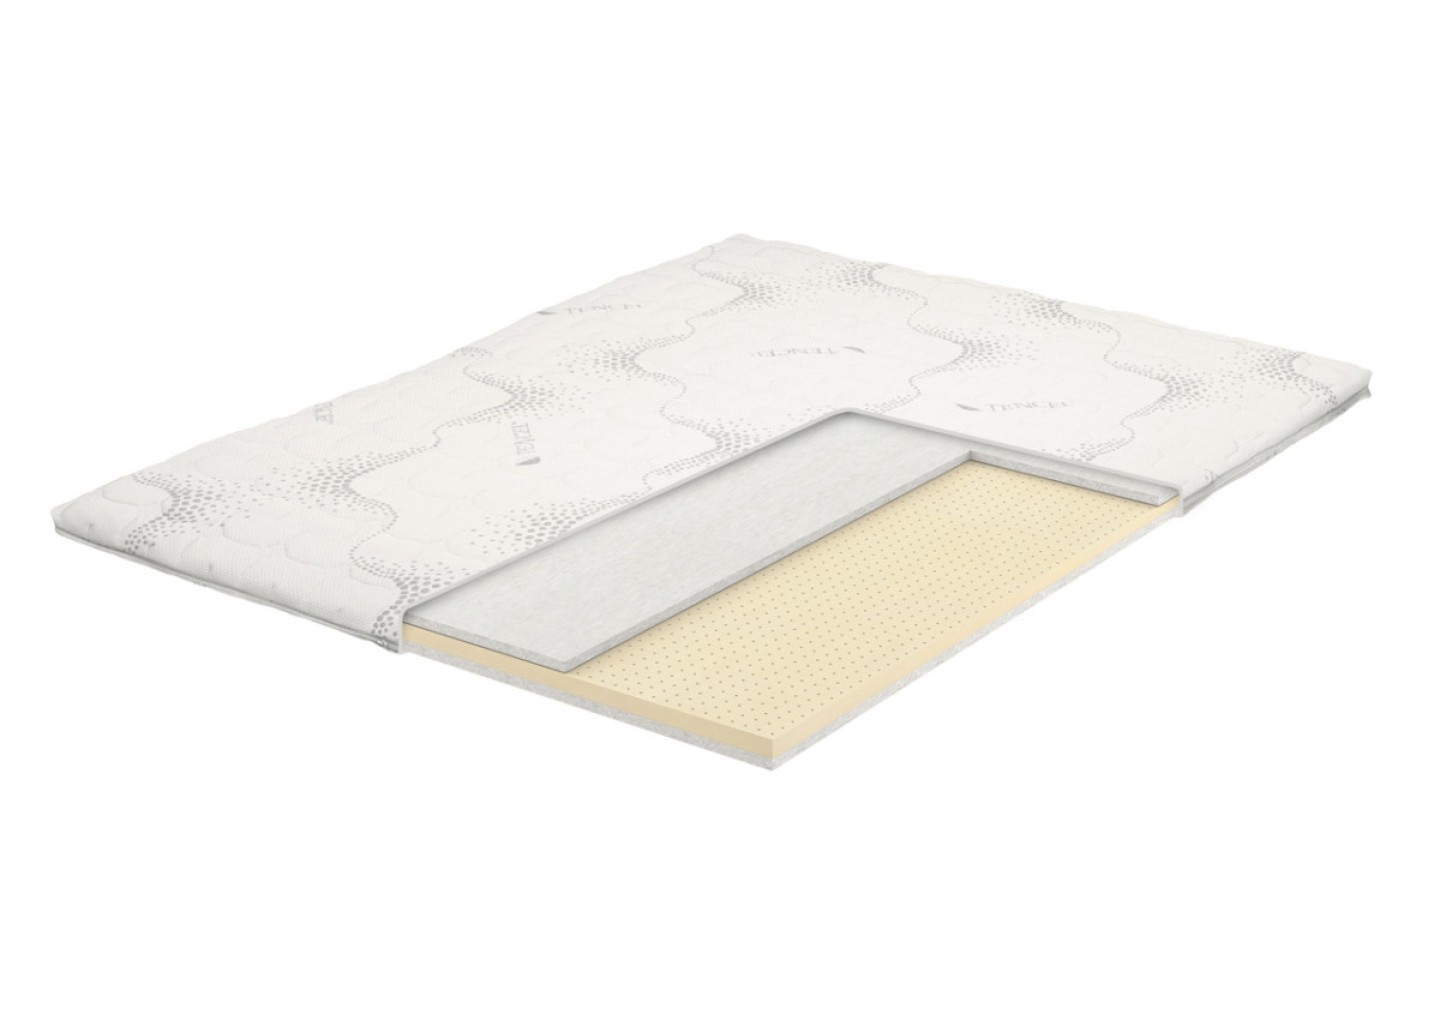 THE LATEX TOP MATTRESS by Elite Strom